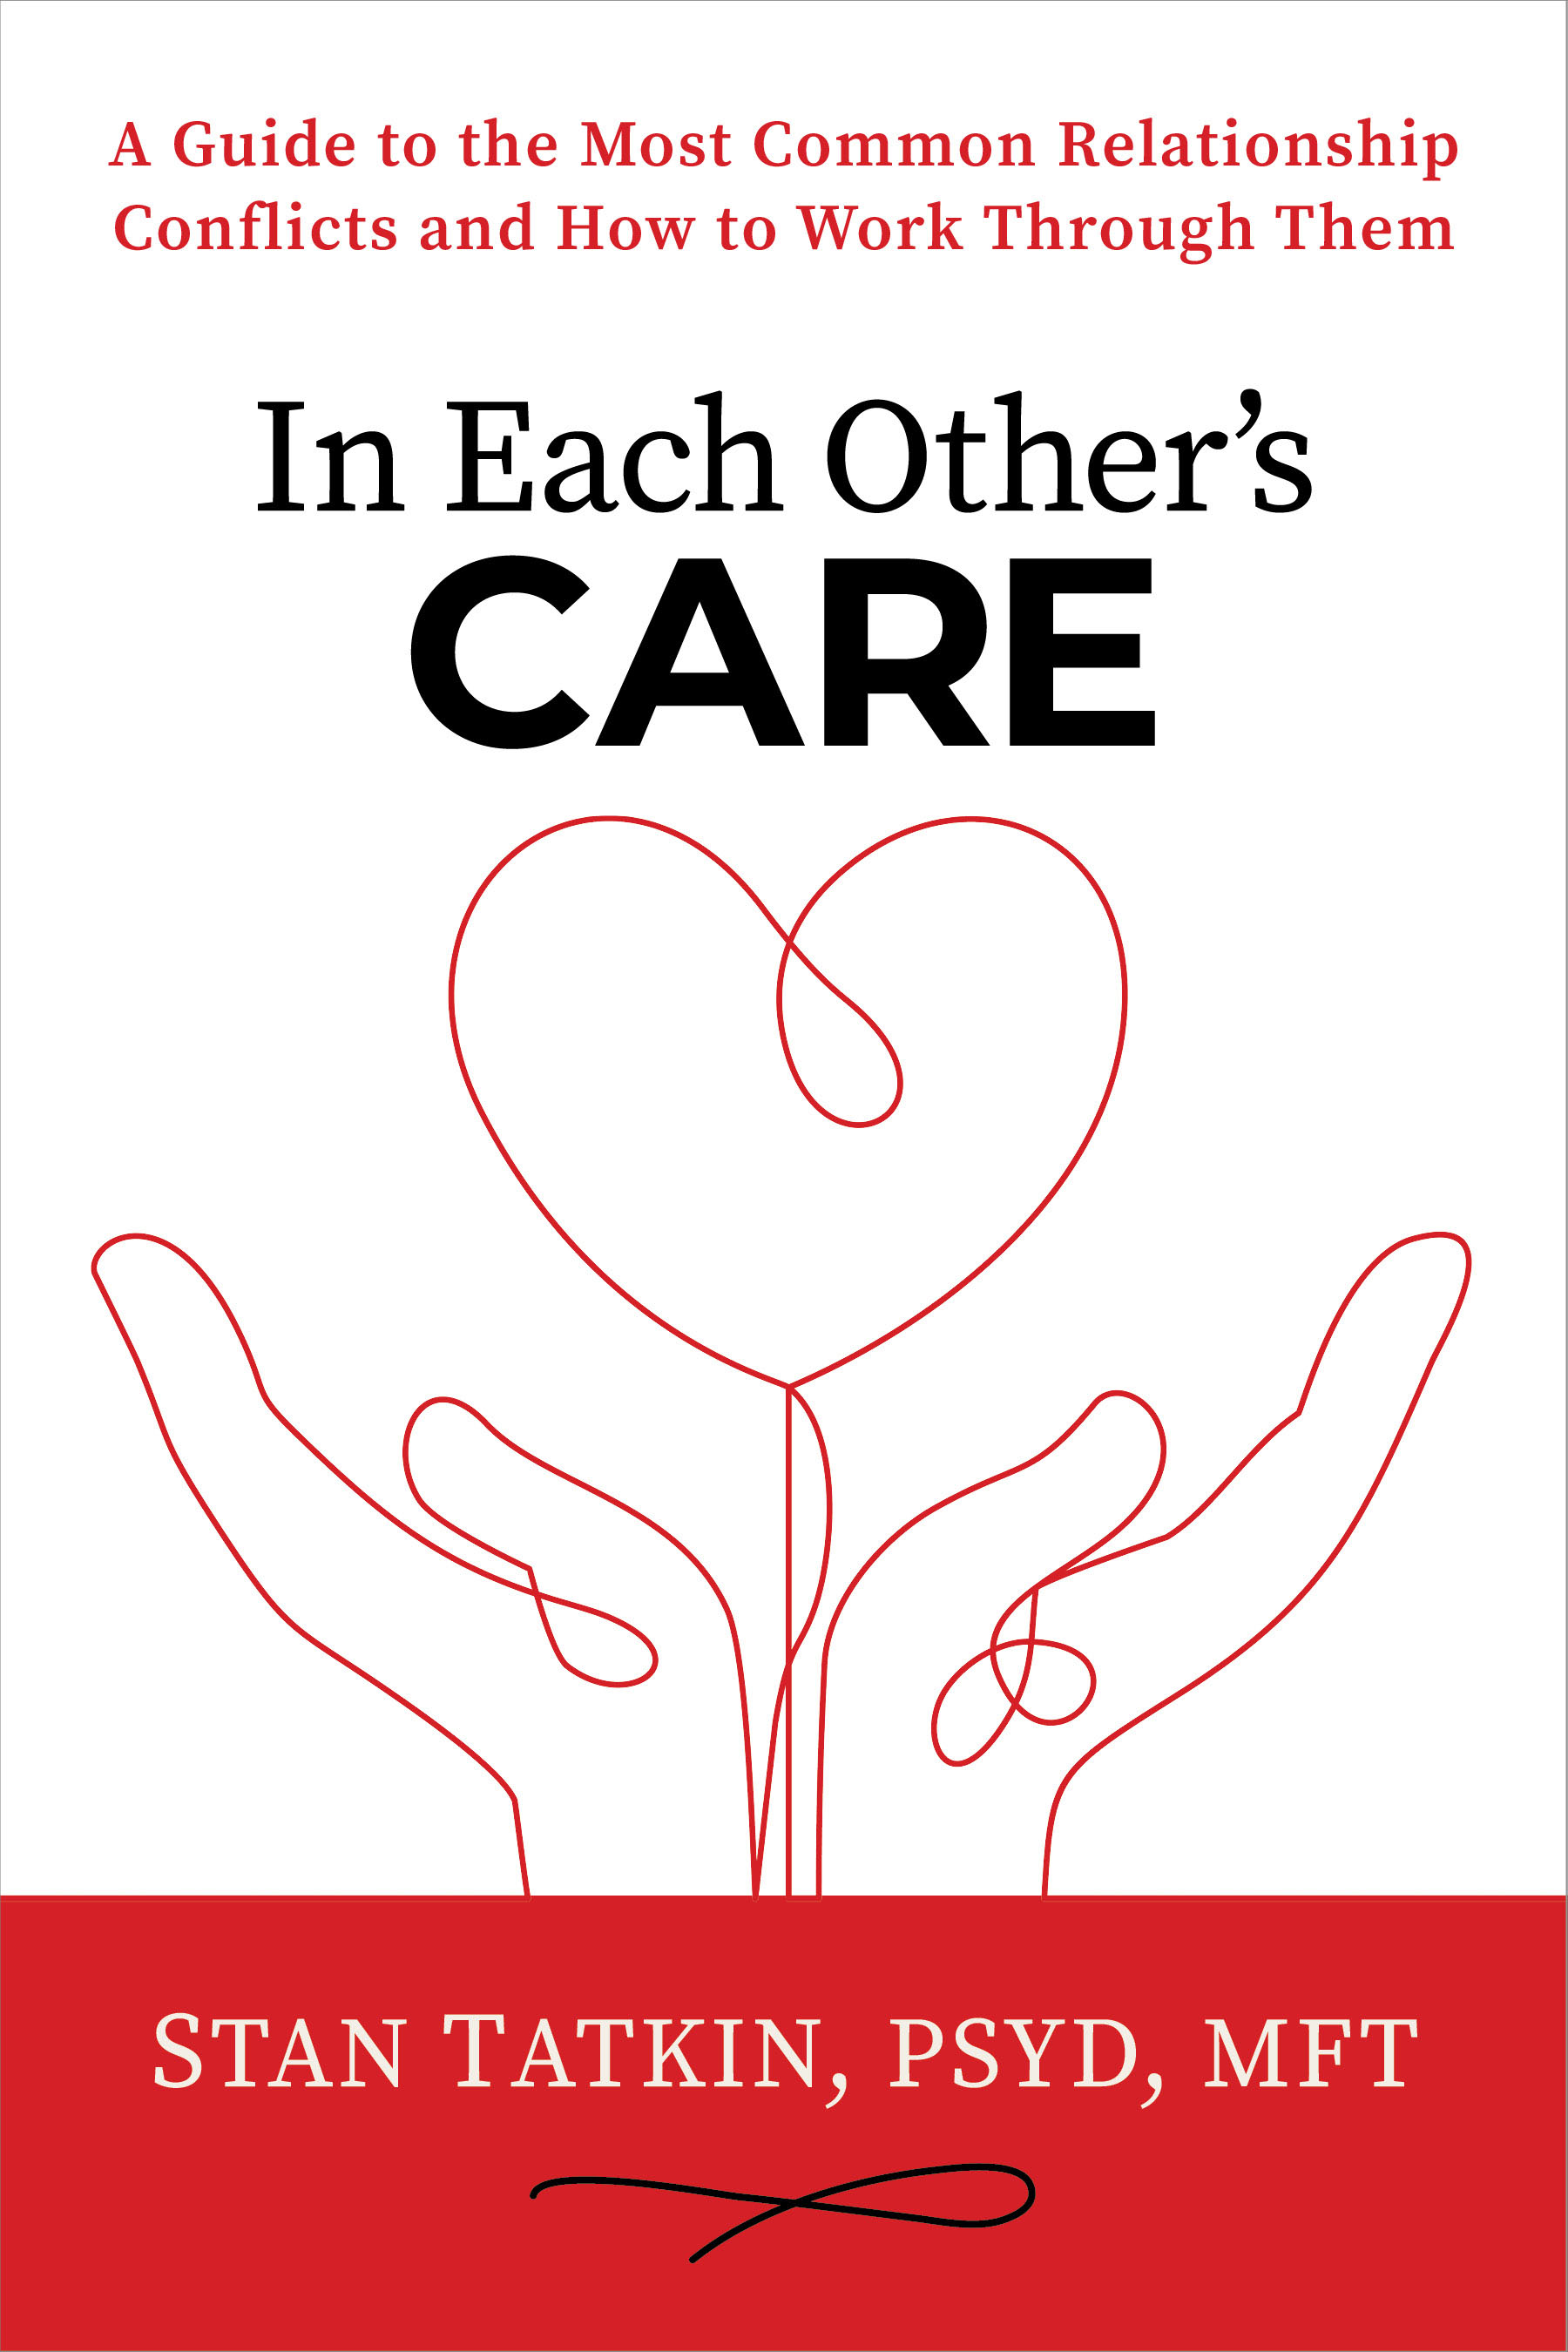 In Each Other’s Care: A Guide to the Most Common Relationship Conflicts and How To Work Through Them